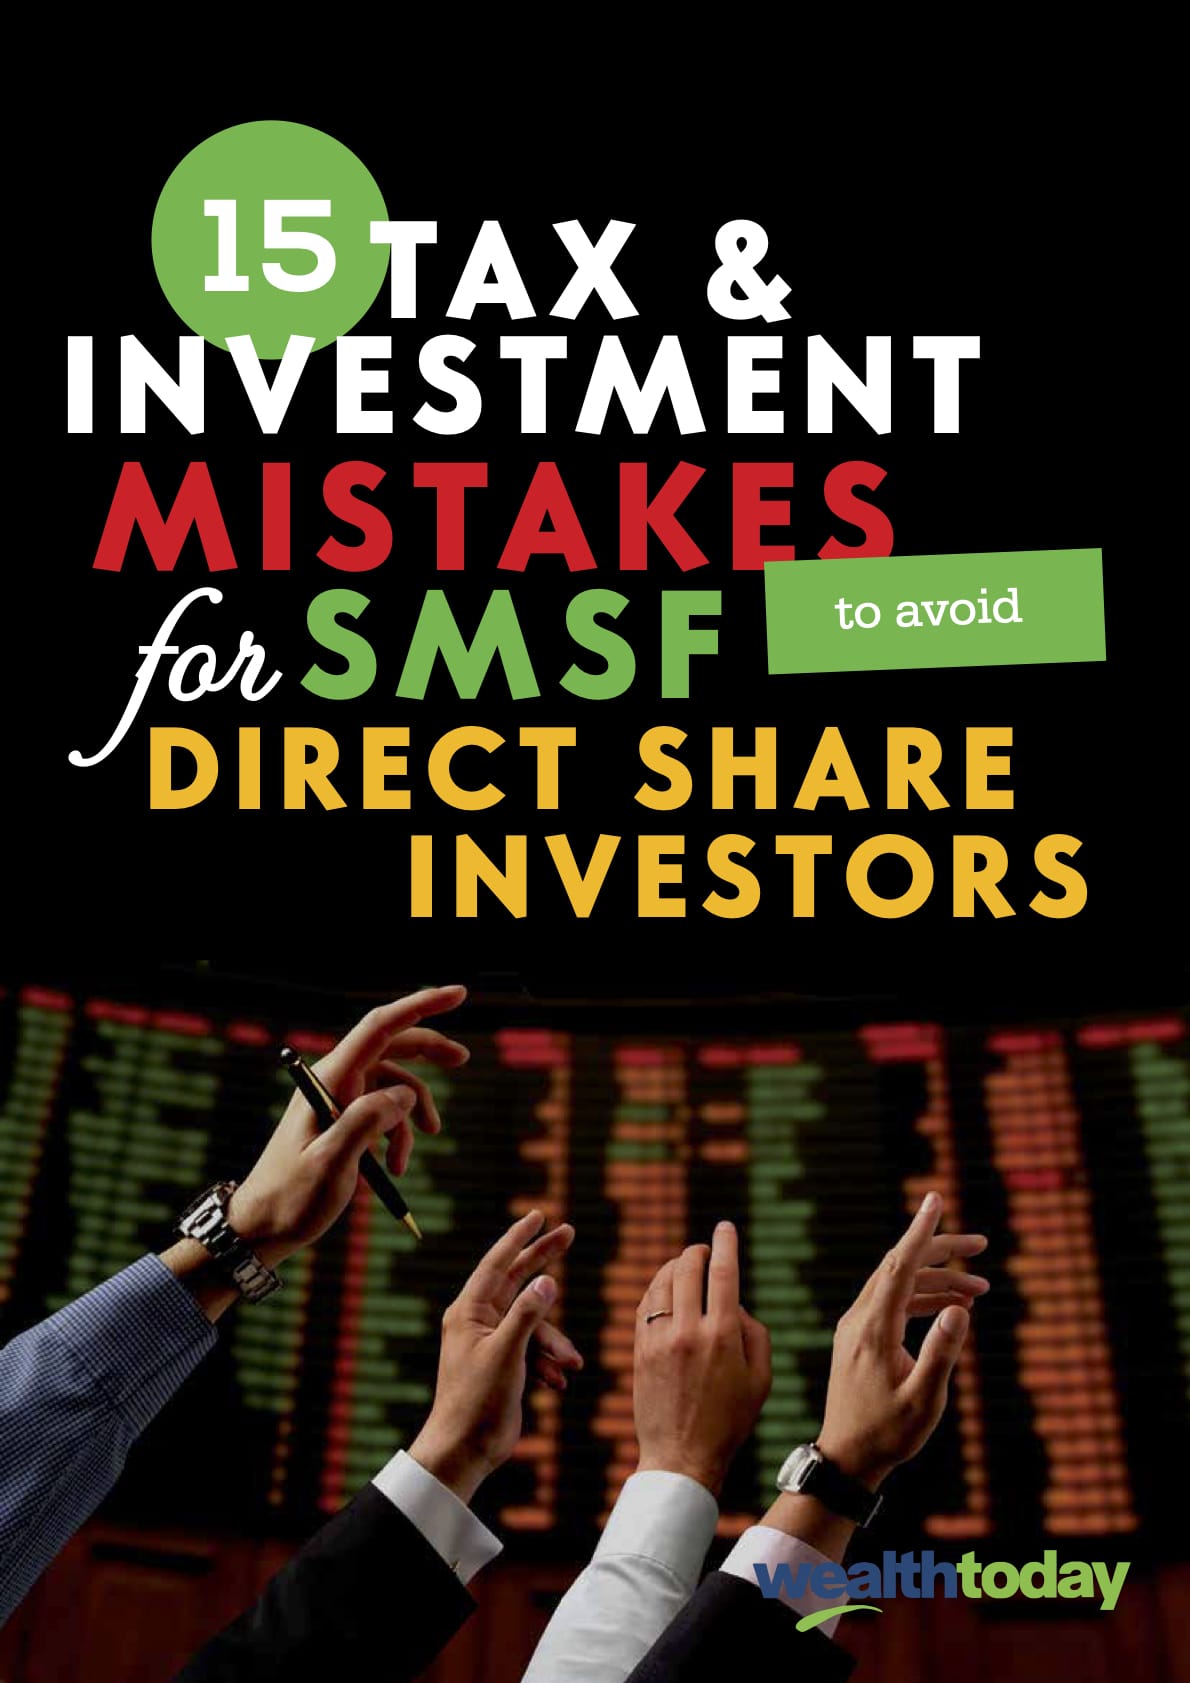 15-Tax-and-Investment-Mistakes-to-Avoid-for-SMSF-Direct-Share-Investors-WT-201810